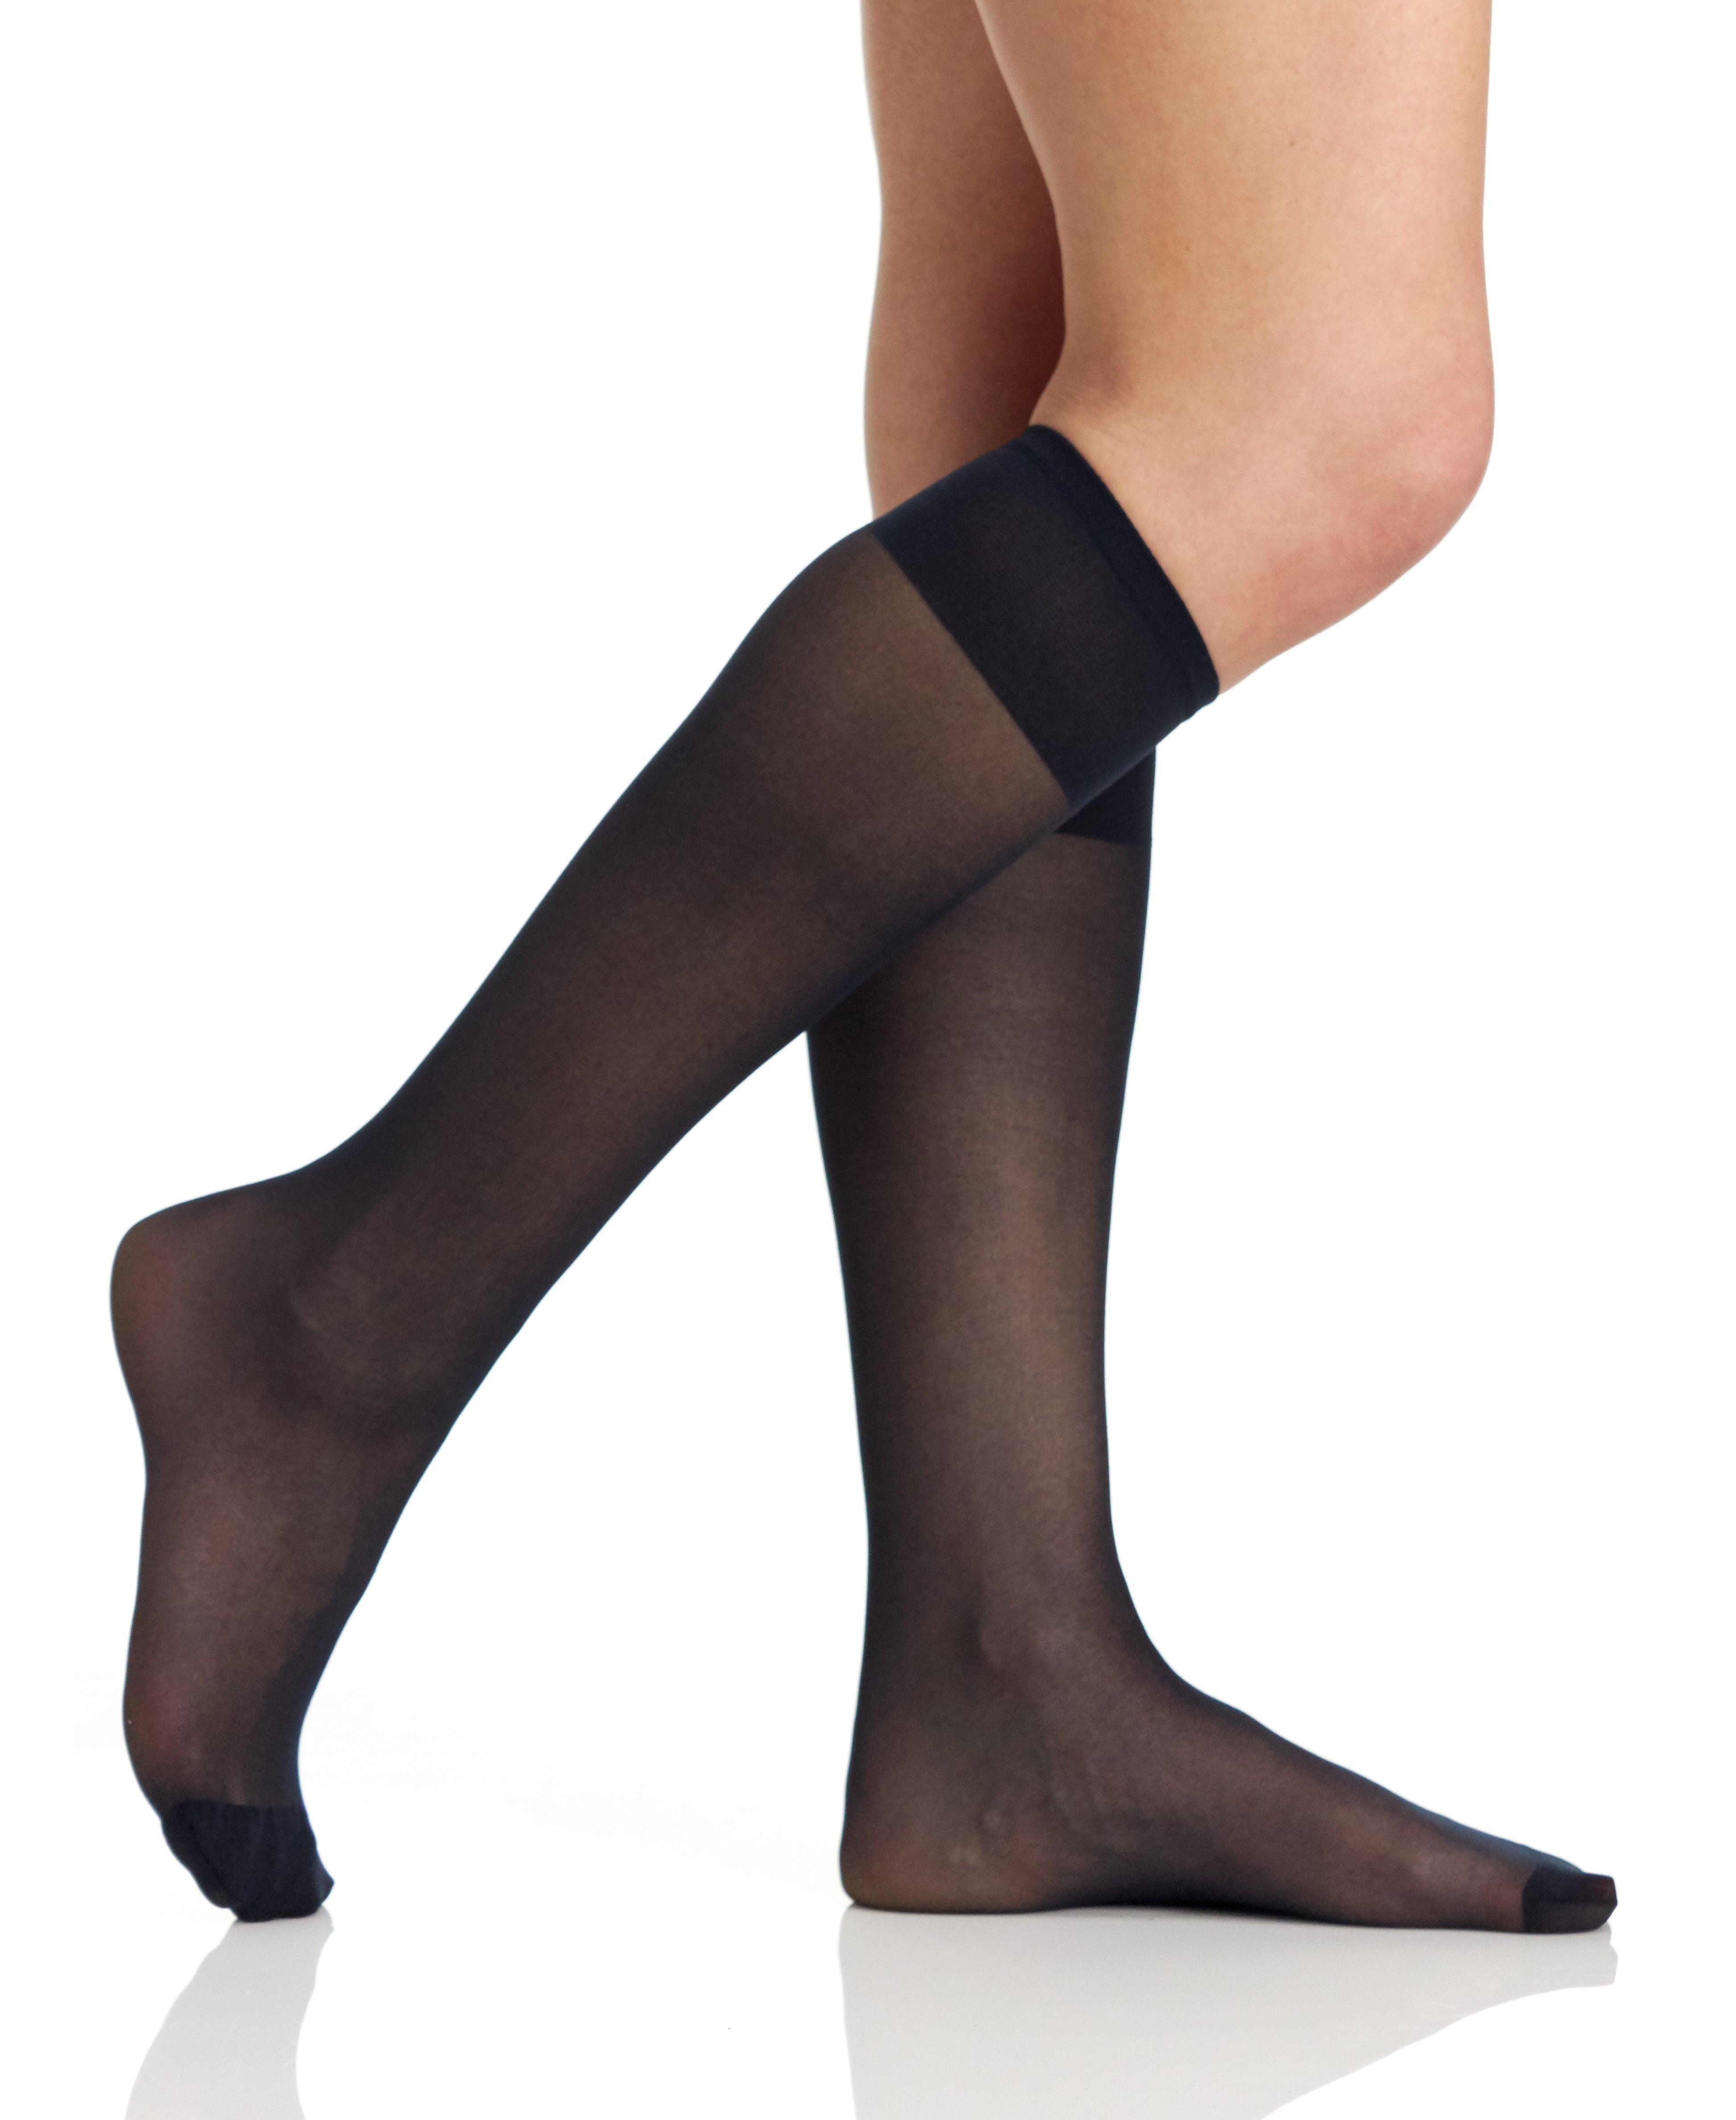 3 Pairs All Day Sheer Knee High Stockings With Reinforced Toe - 6528 ...